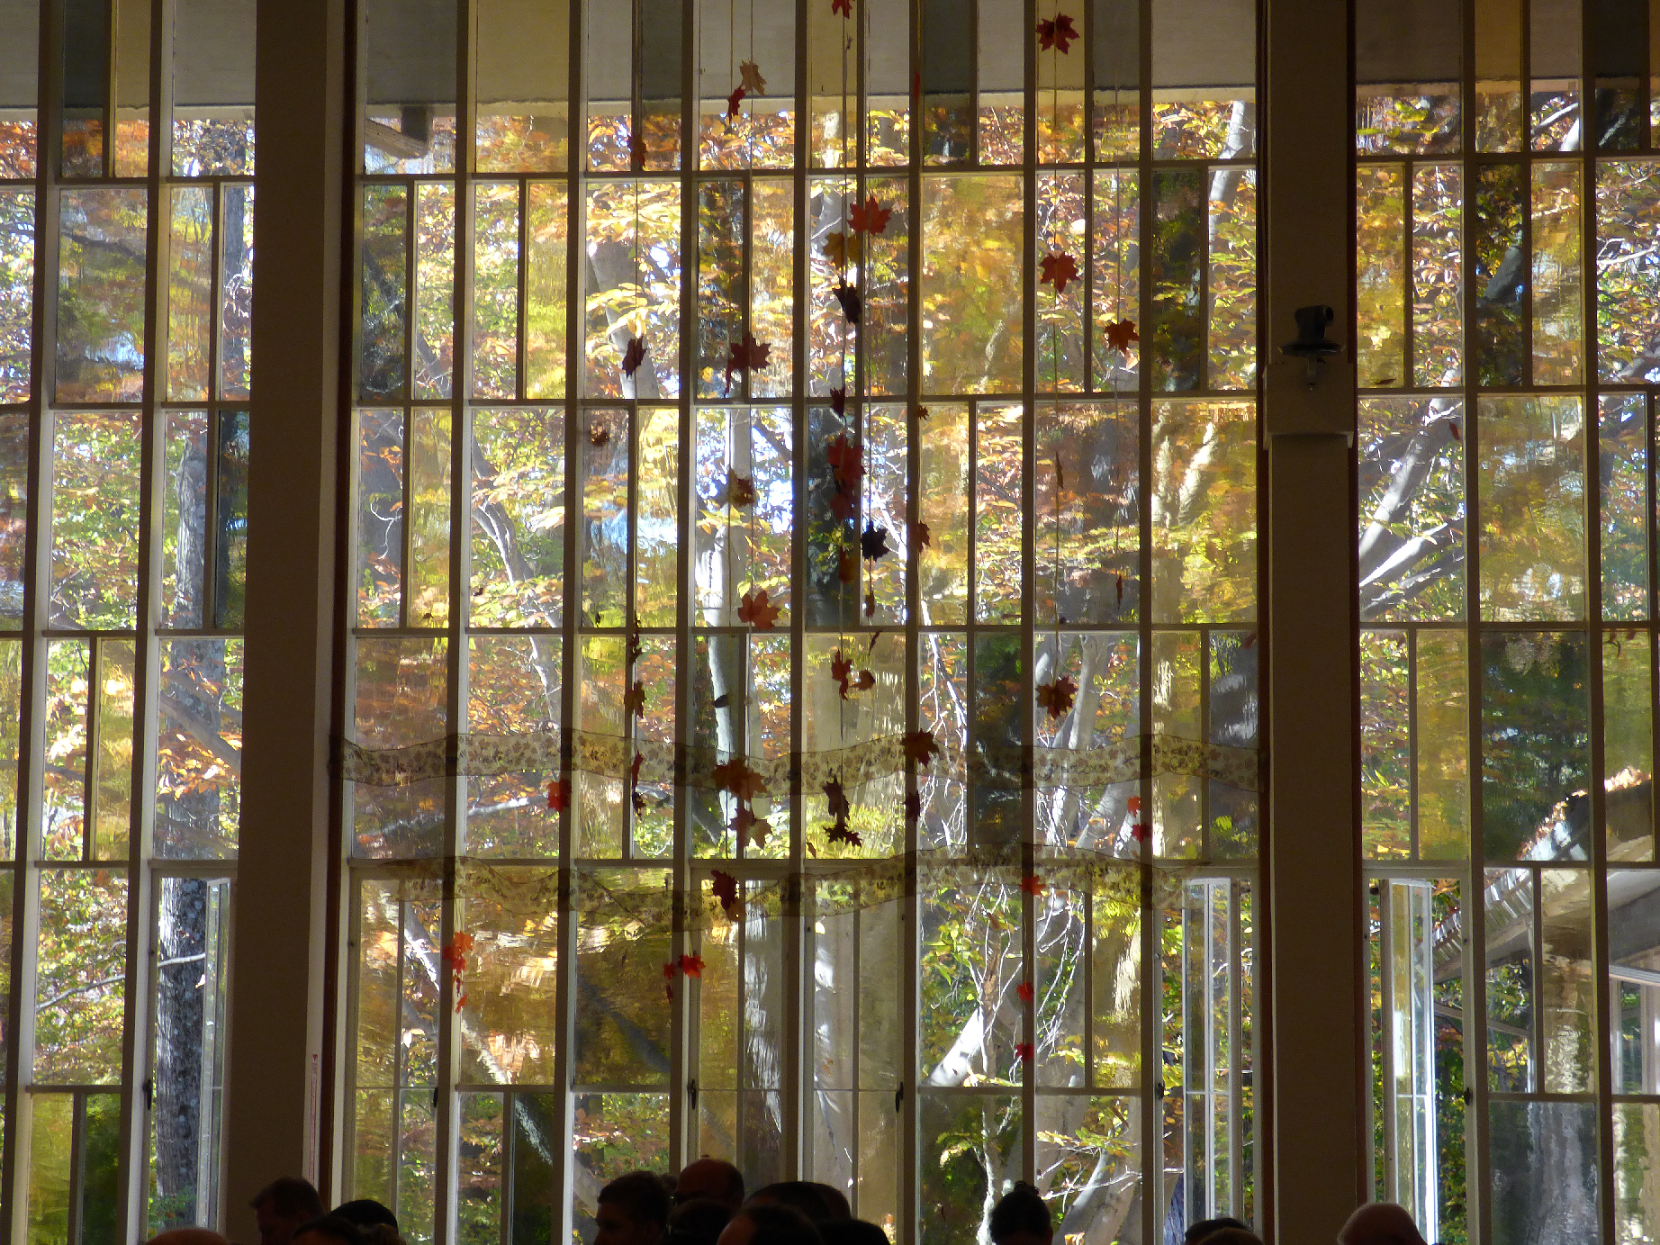 looking out the Cedar Lane Sanctuary Windows during a sunny fall day